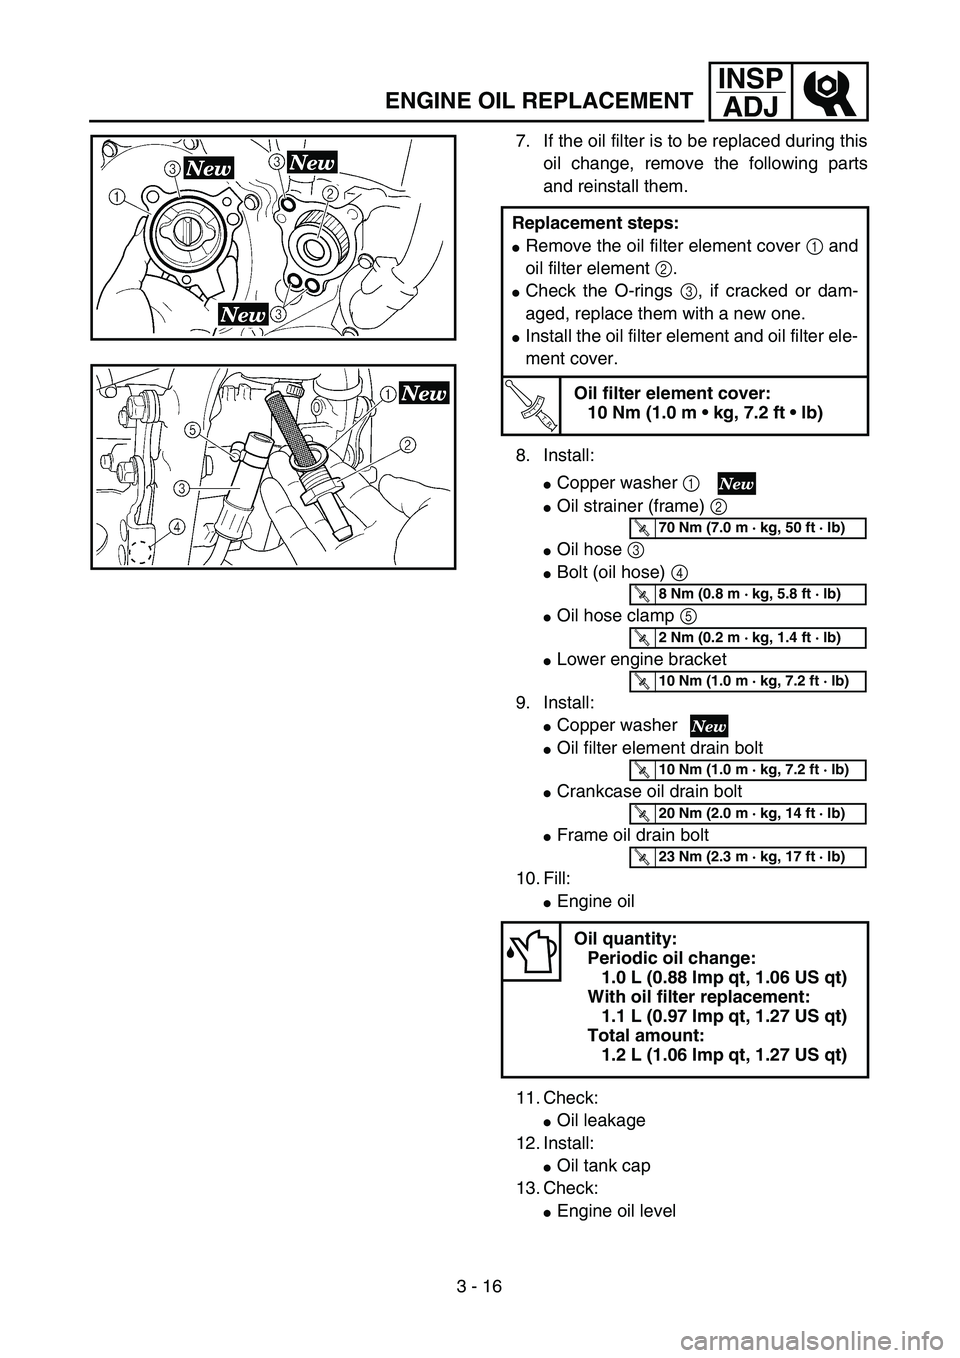 YAMAHA YZ250F 2004  Owners Manual 3 - 16
INSP
ADJ
ENGINE OIL REPLACEMENT
7. If the oil filter is to be replaced during this
oil change, remove the following parts
and reinstall them.
8. Install:
Copper washer 1 
Oil strainer (frame)